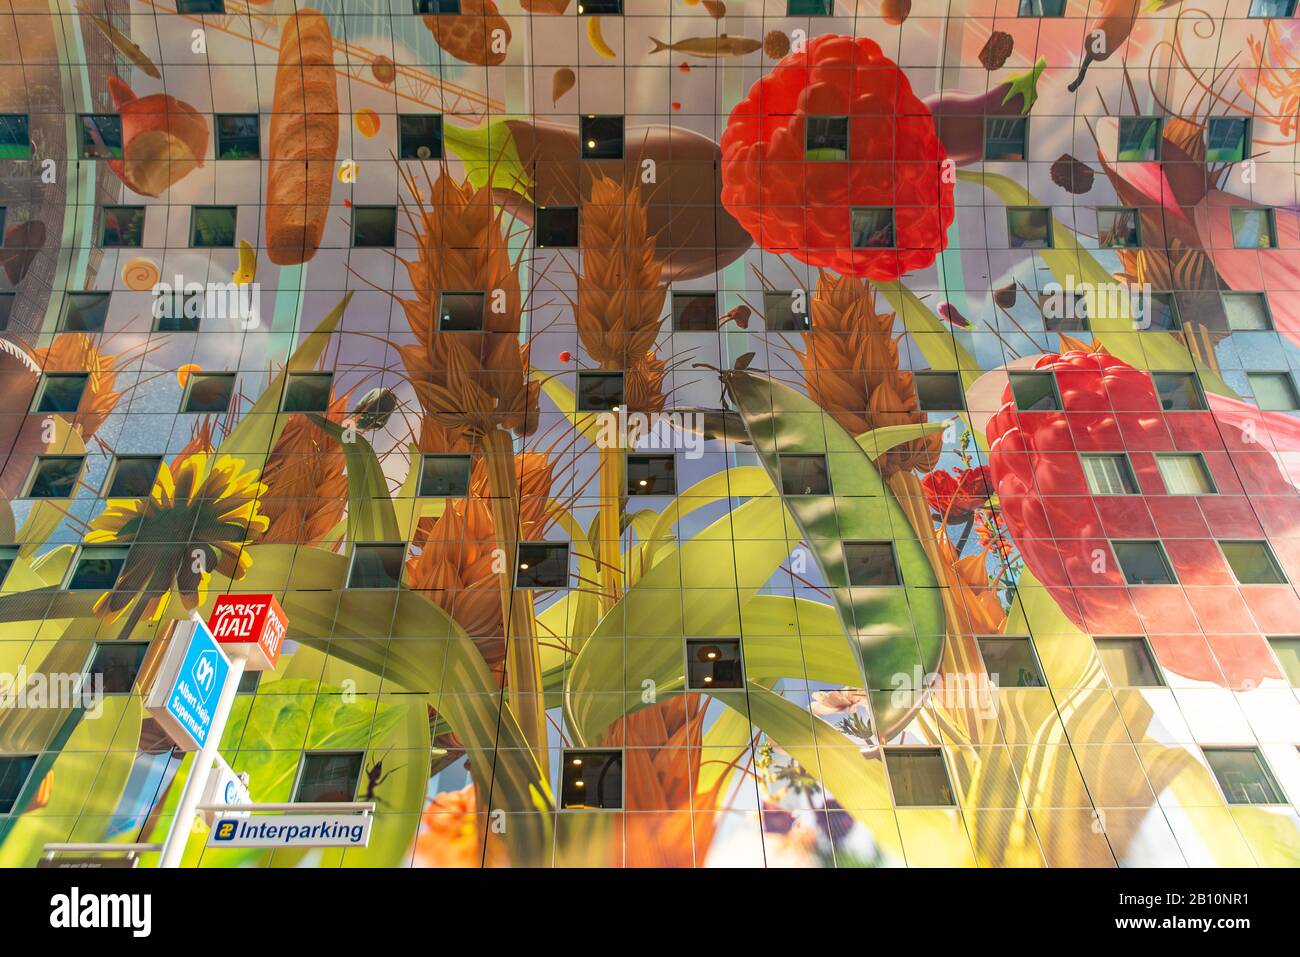 The colorful painting on the wall of Market Hall in Rotterdam, Netherlands Stock Photo